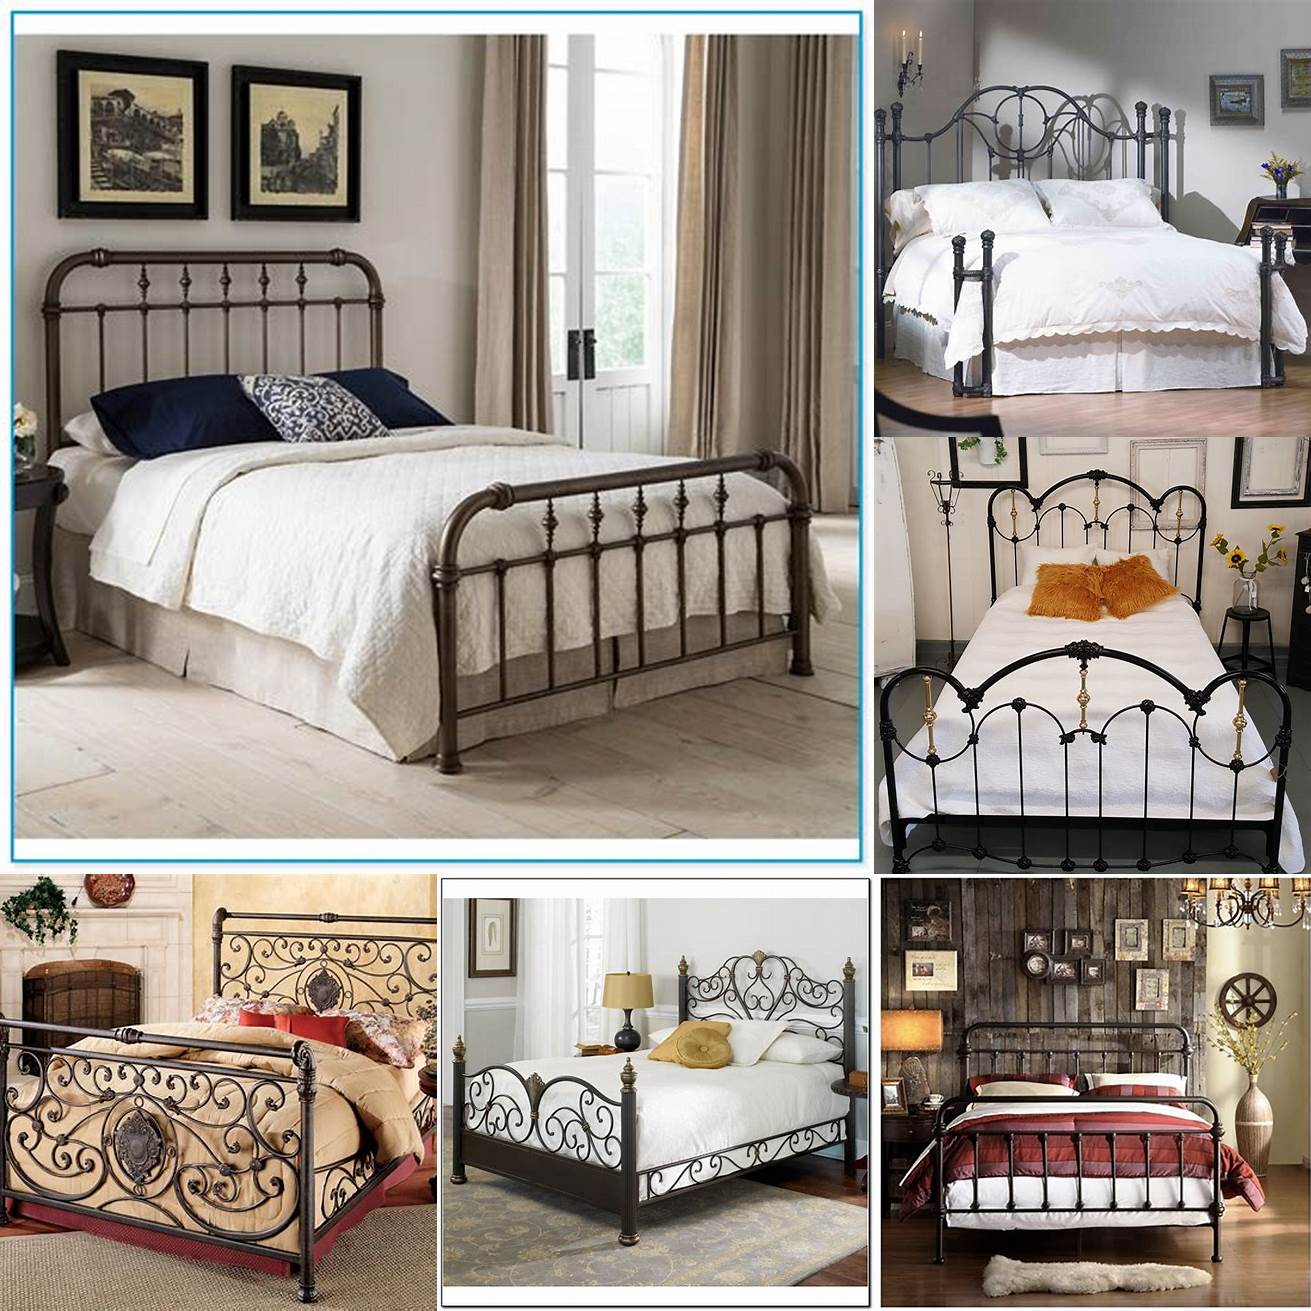 Wrought iron bed frame queen with dark bedding and bold patterns